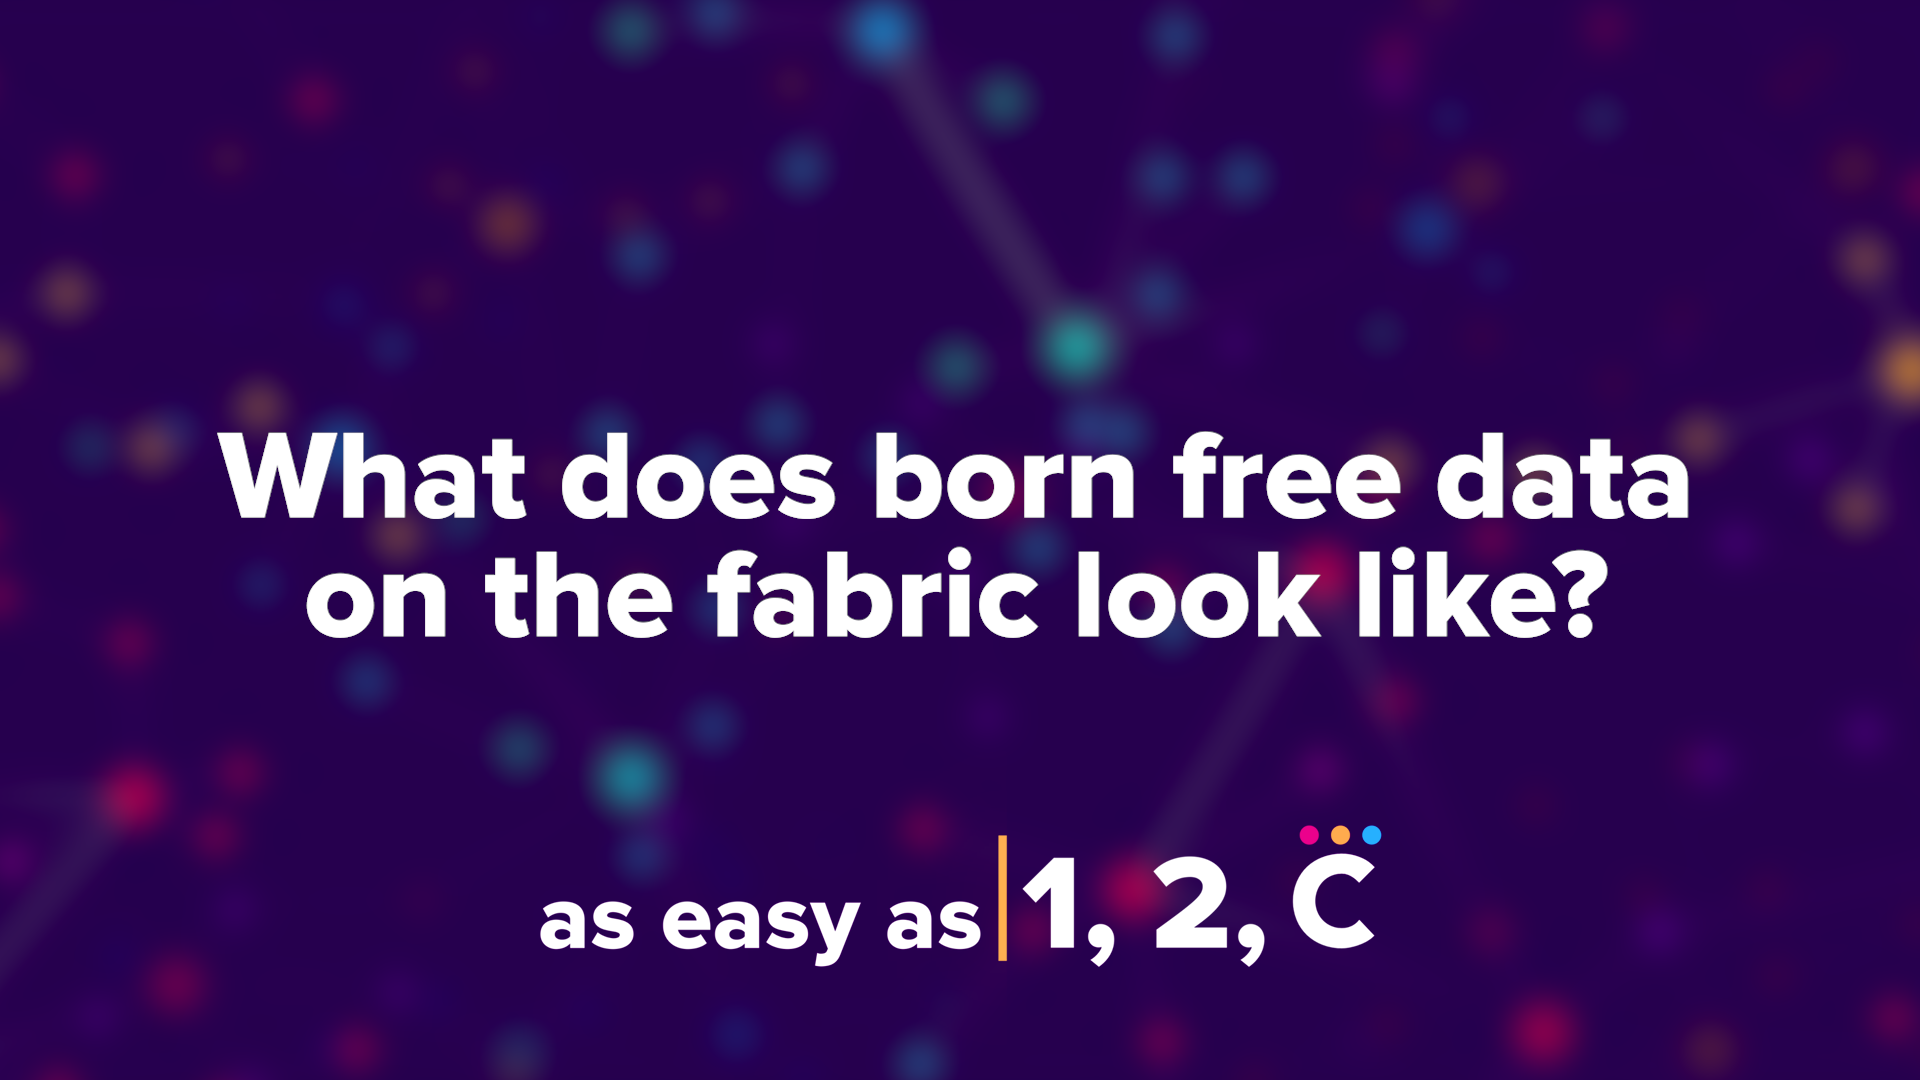 As Easy As 1, 2, C: What Does Born Free Data on the Fabric Look Like?